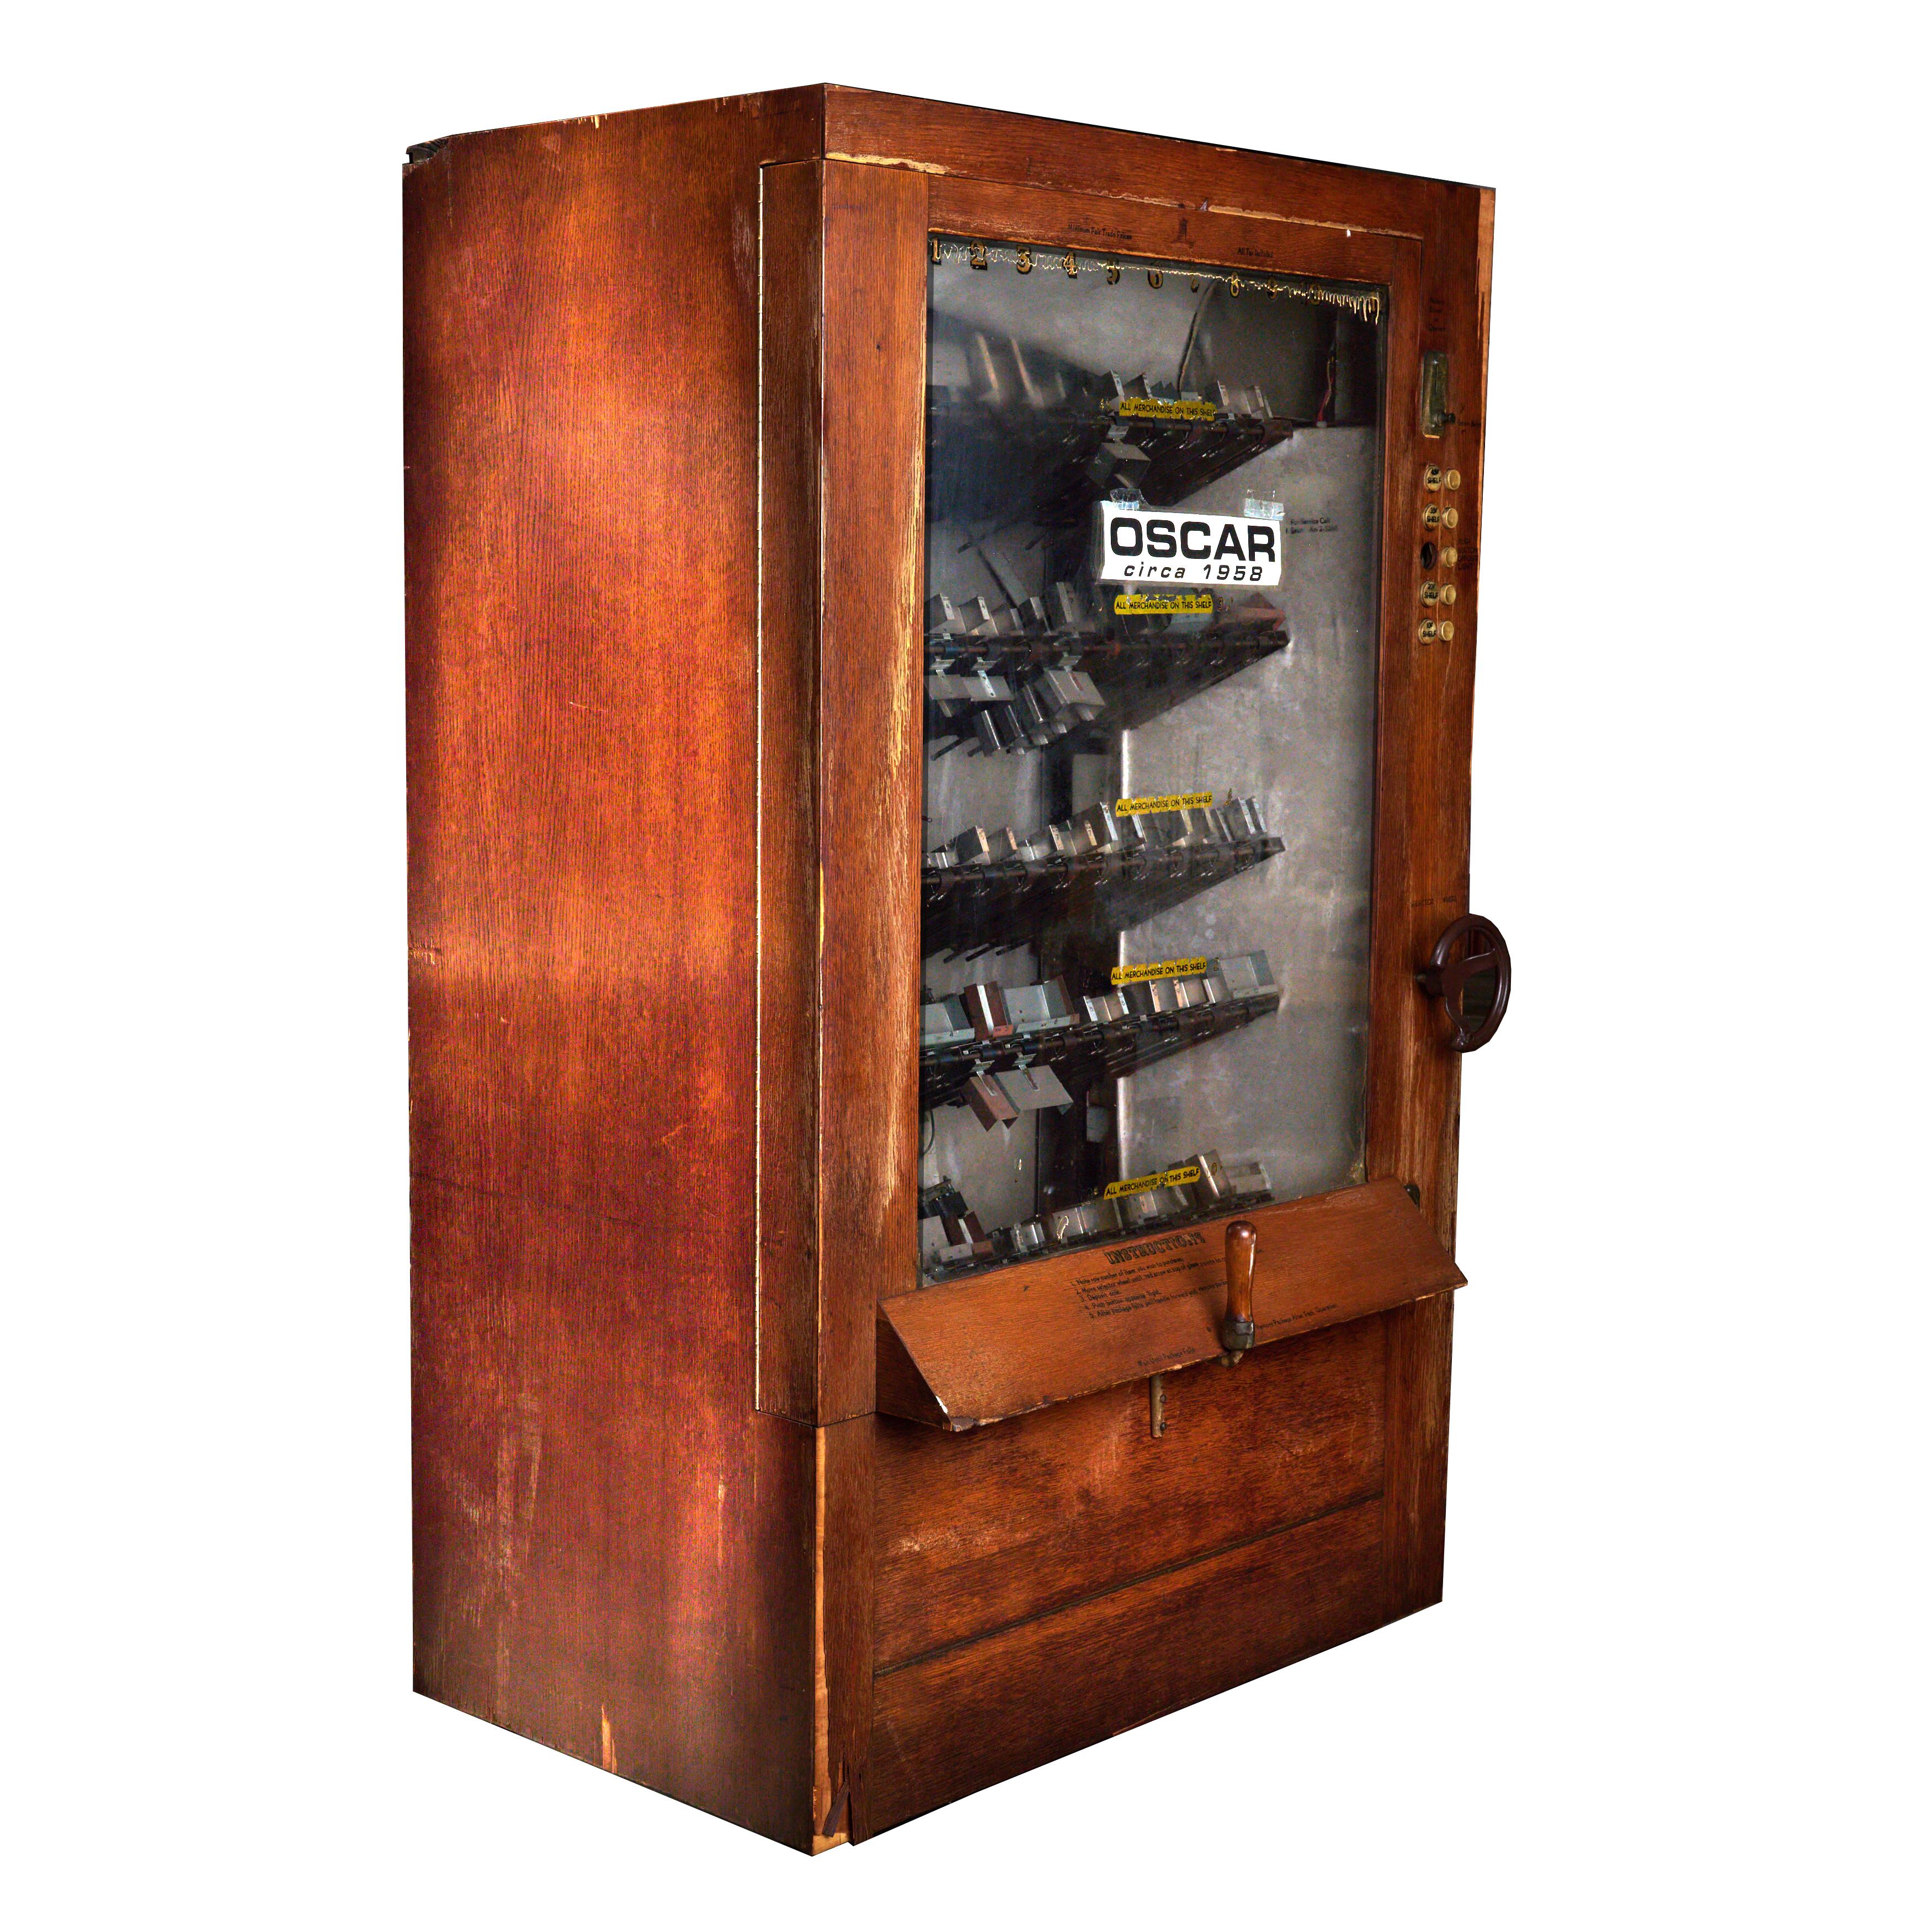 Prototype of America's first glass front vending machine, nicknamed 